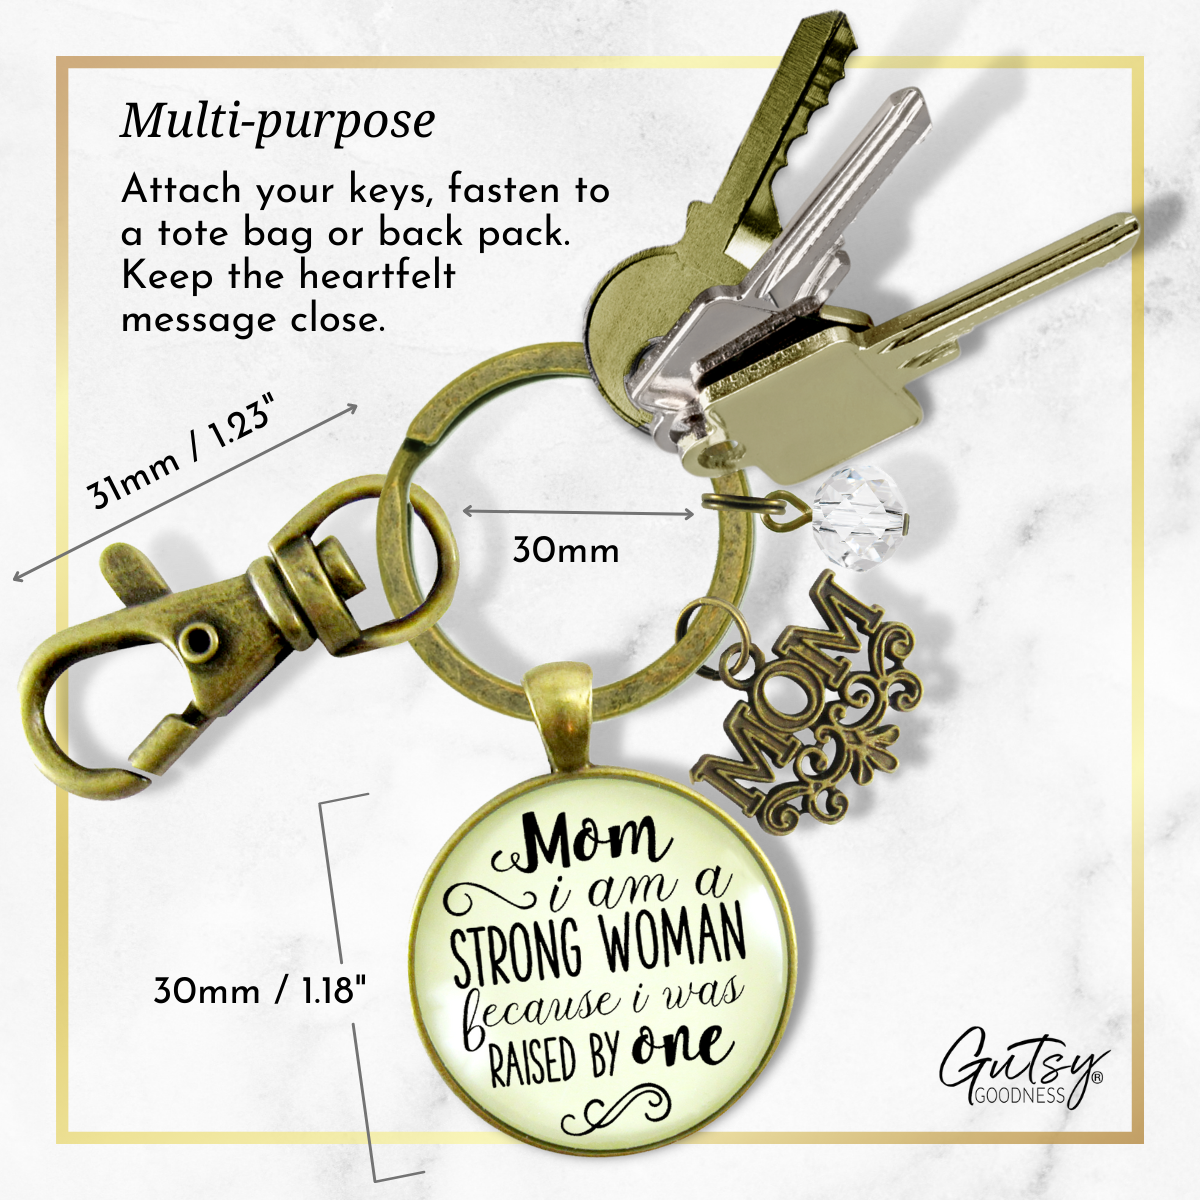 Mother Daughter Keychain Mom I am a Strong Woman Because Raised By One Brave Jewelry - Gutsy Goodness Handmade Jewelry;Mother Daughter Keychain Mom I Am A Strong Woman Because Raised By One Brave Jewelry - Gutsy Goodness Handmade Jewelry Gifts